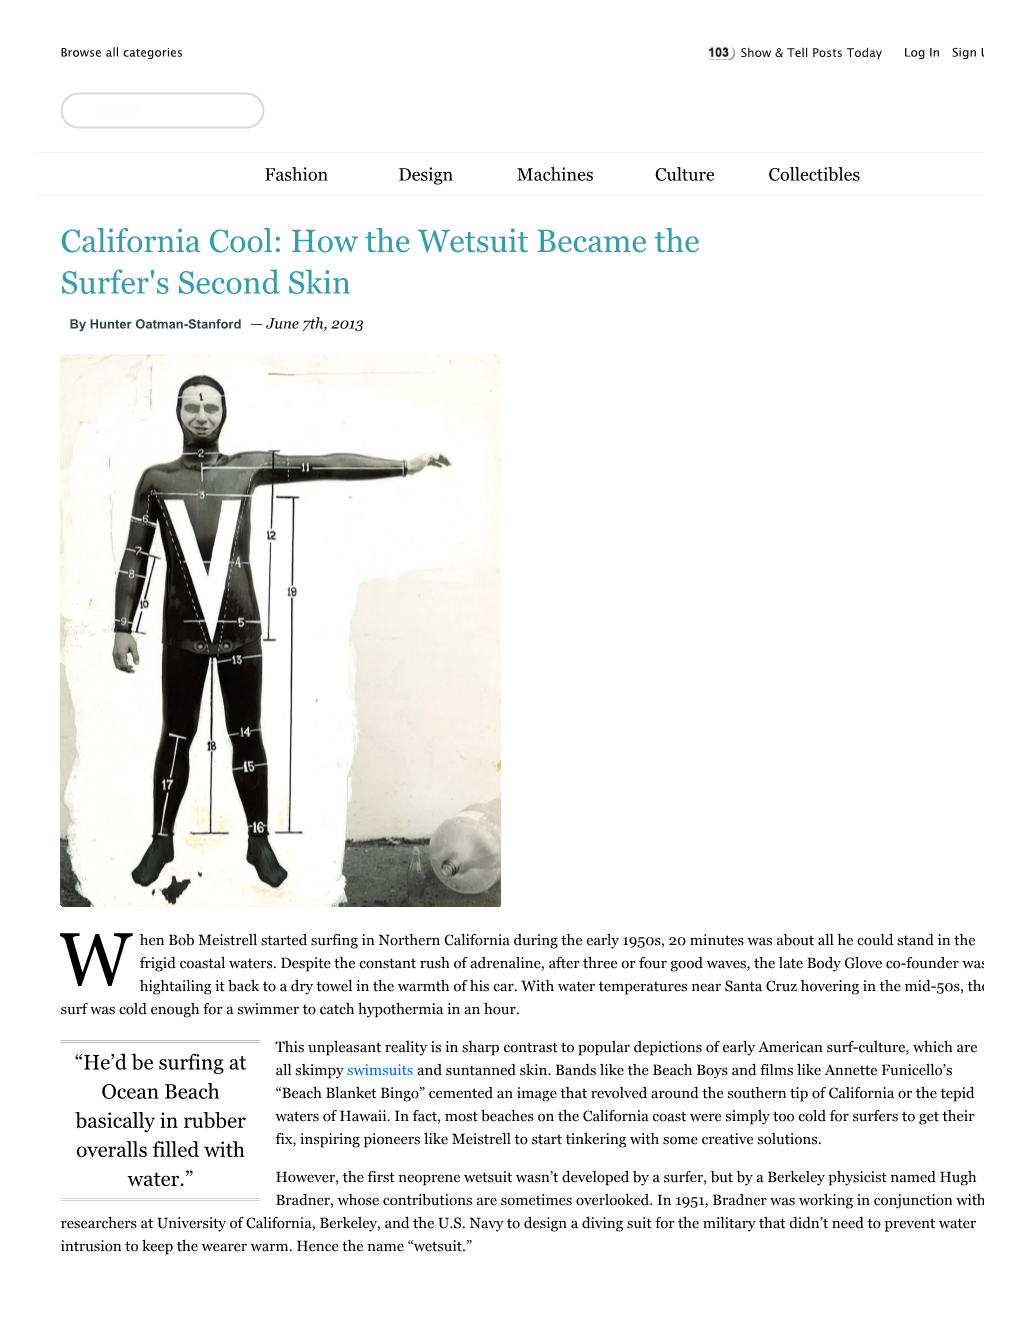 California Cool: How the Wetsuit Became The